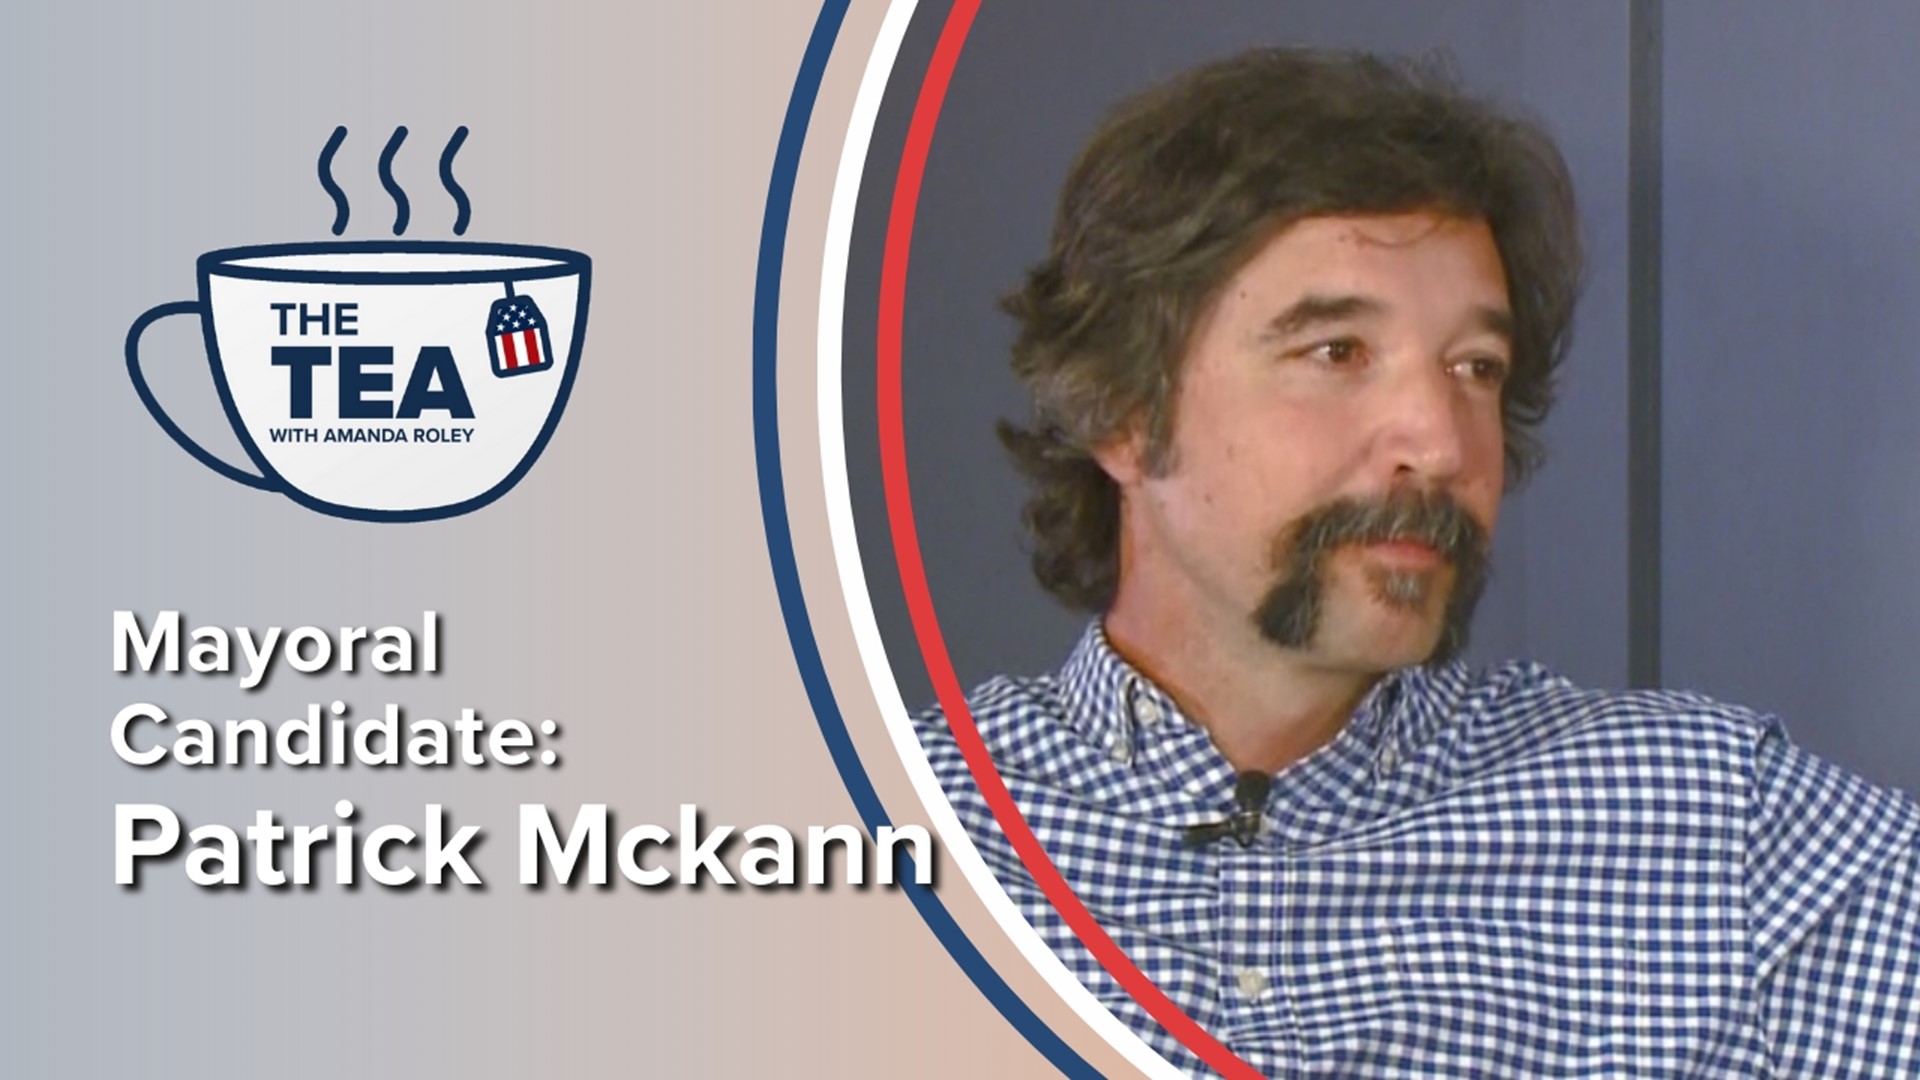 Patrick McKann is running for Spokane mayor. We spoke with him over tea about what he would bring to the position.